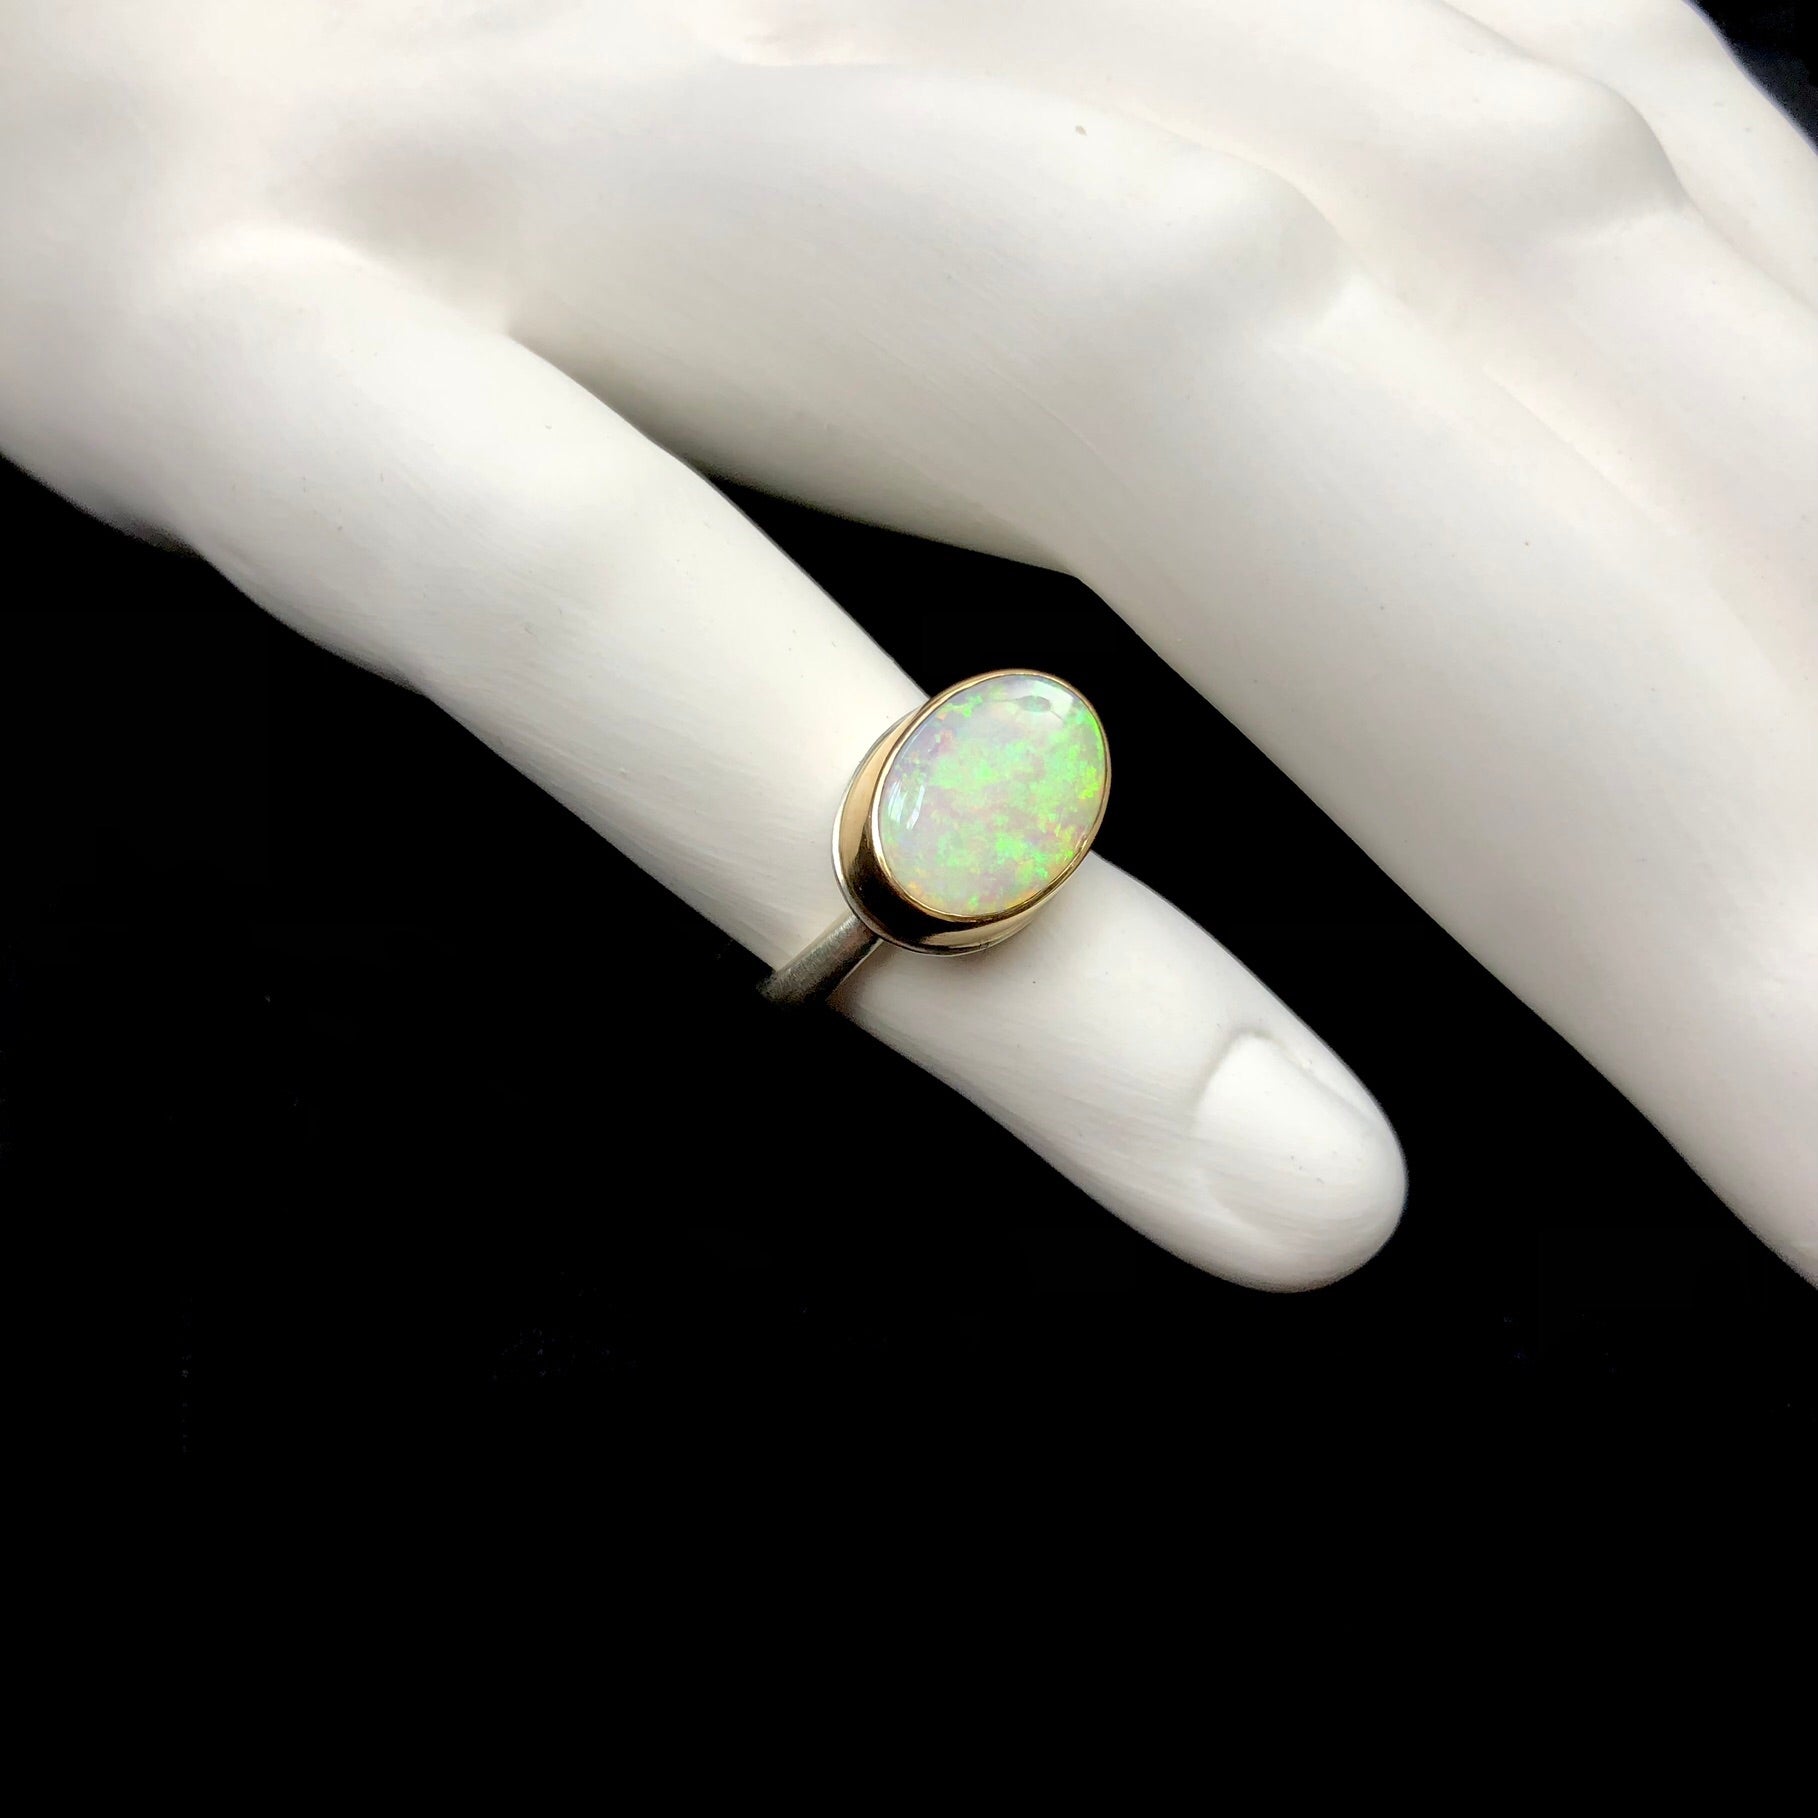 Side view of Mintabe opal stone ring with iridescent green accents, gold setting and silver band shown on shite ceramic finger